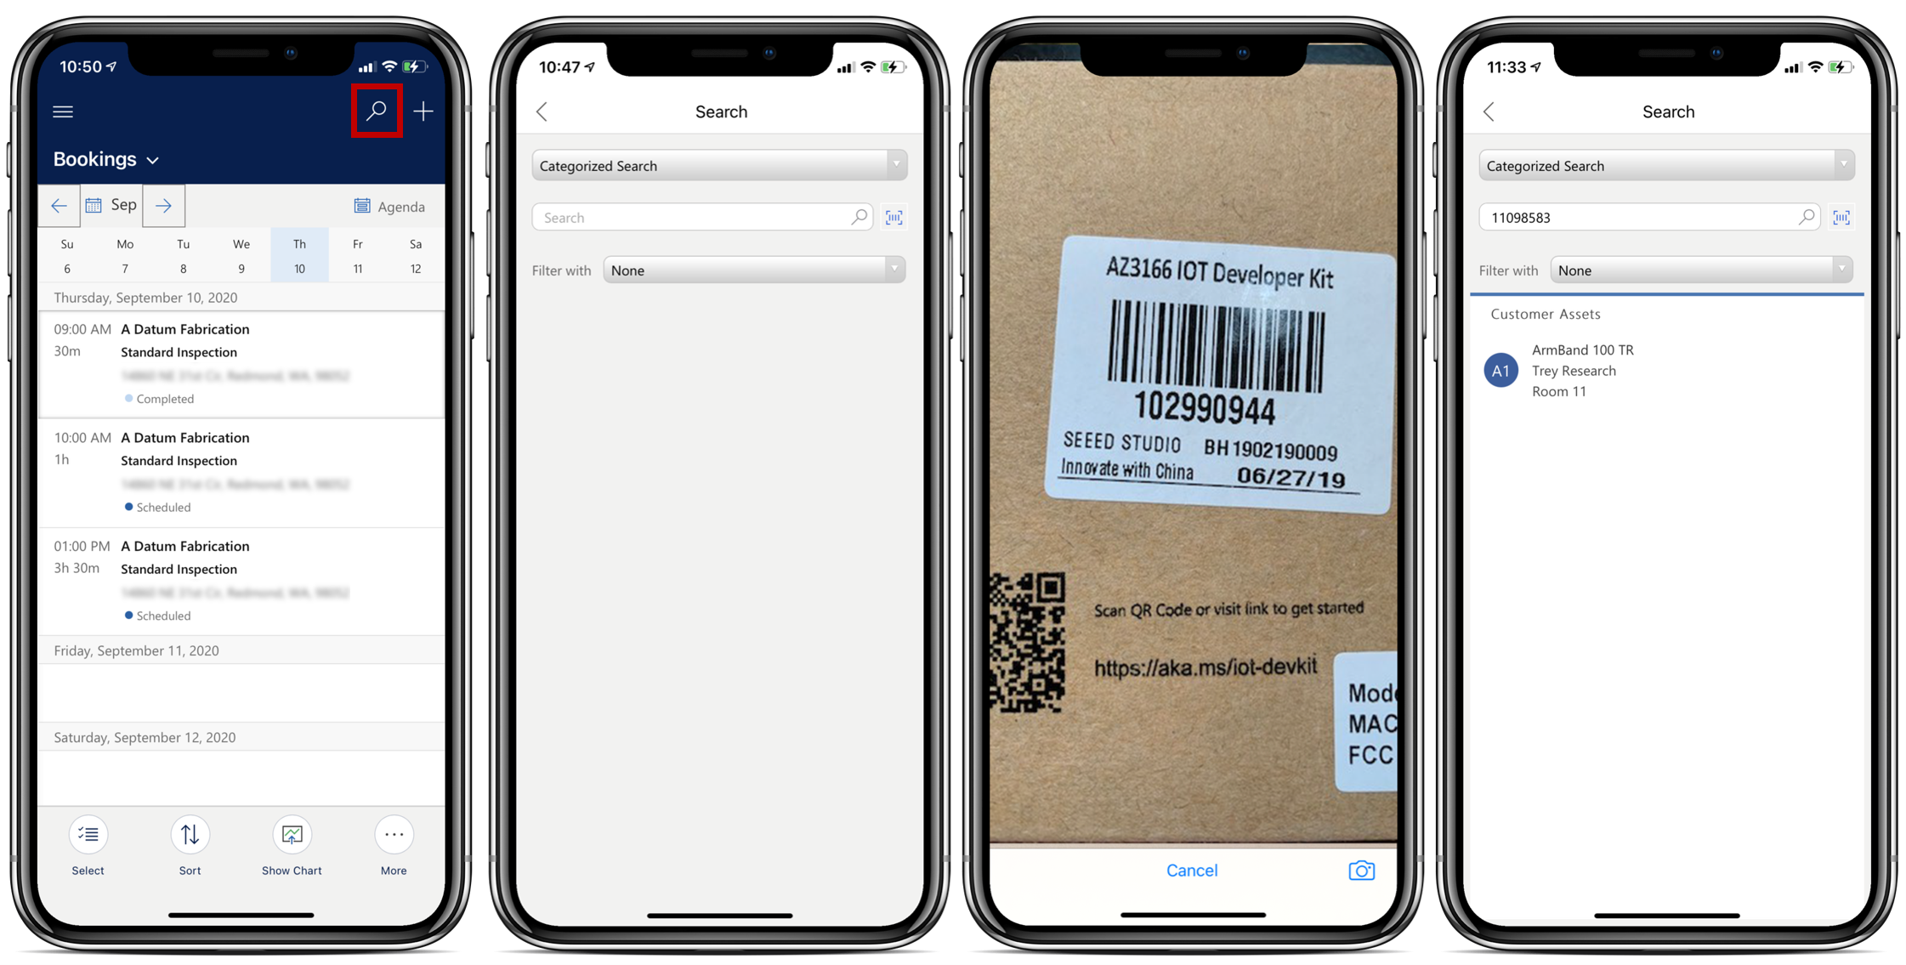 Screenshot of a simulated image showing four mobile devices in different stages of the barcode scan process.